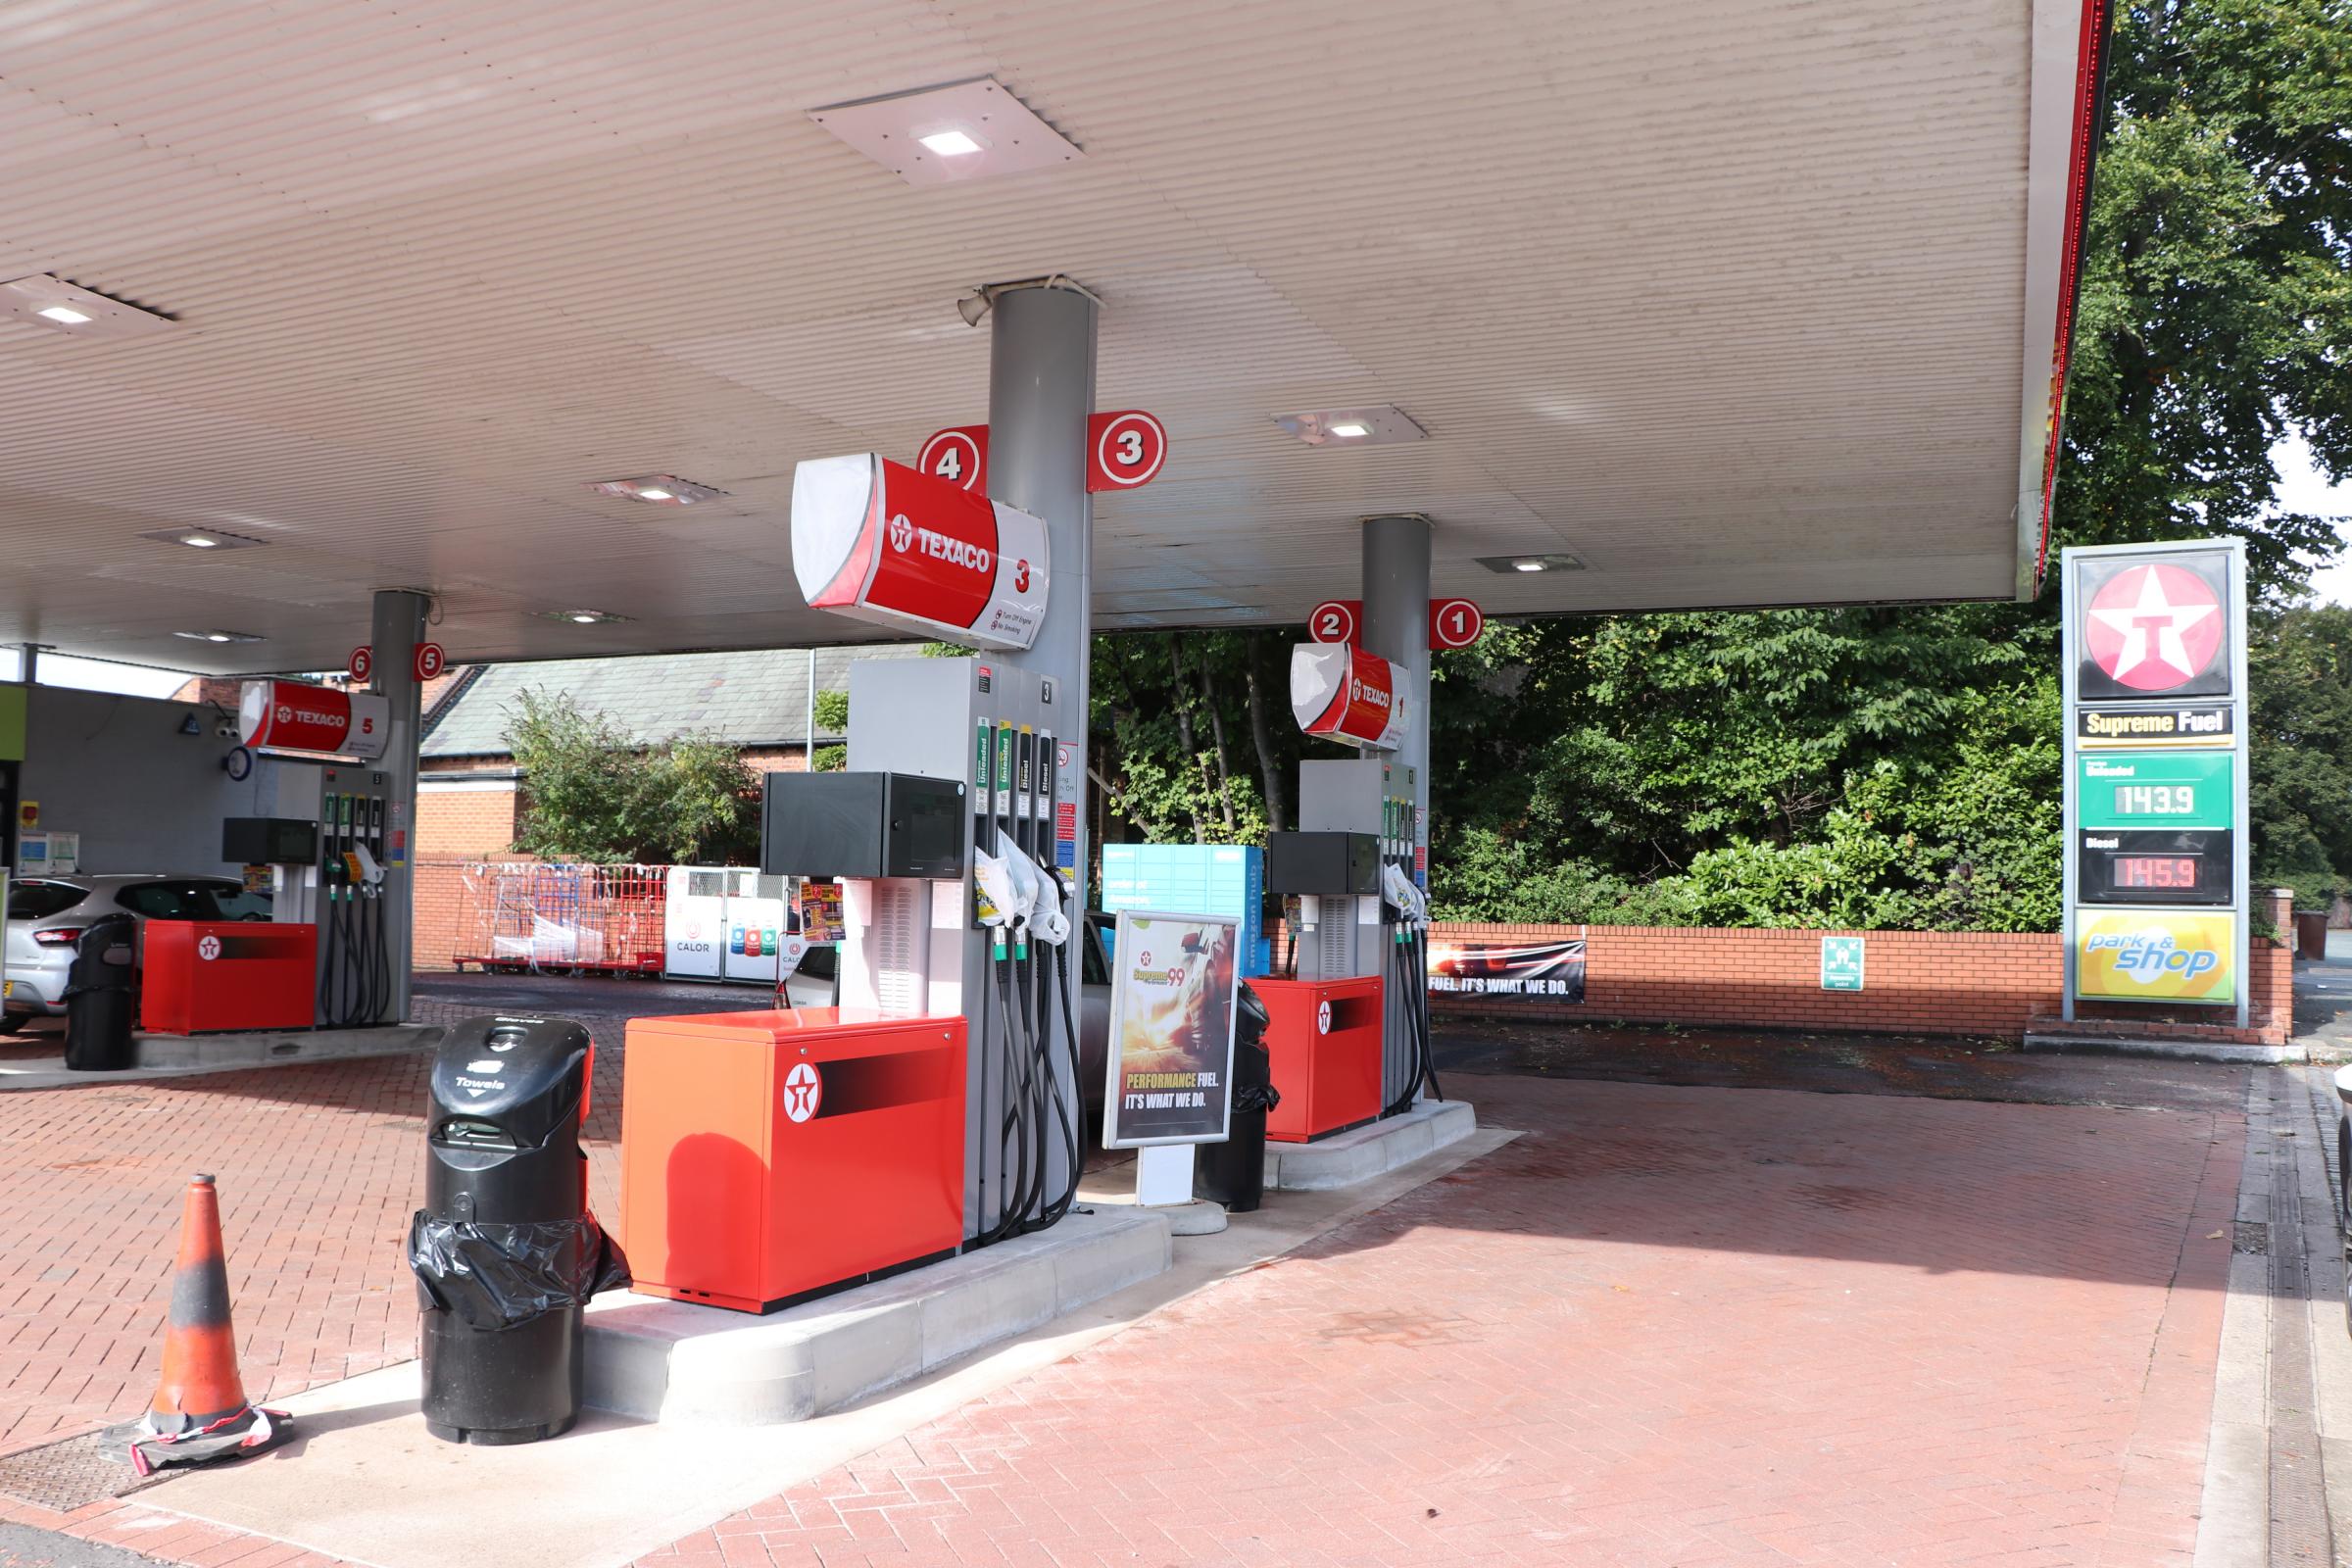 Texaco in Bromborough currently has no spending cap but the highest prices in the local area